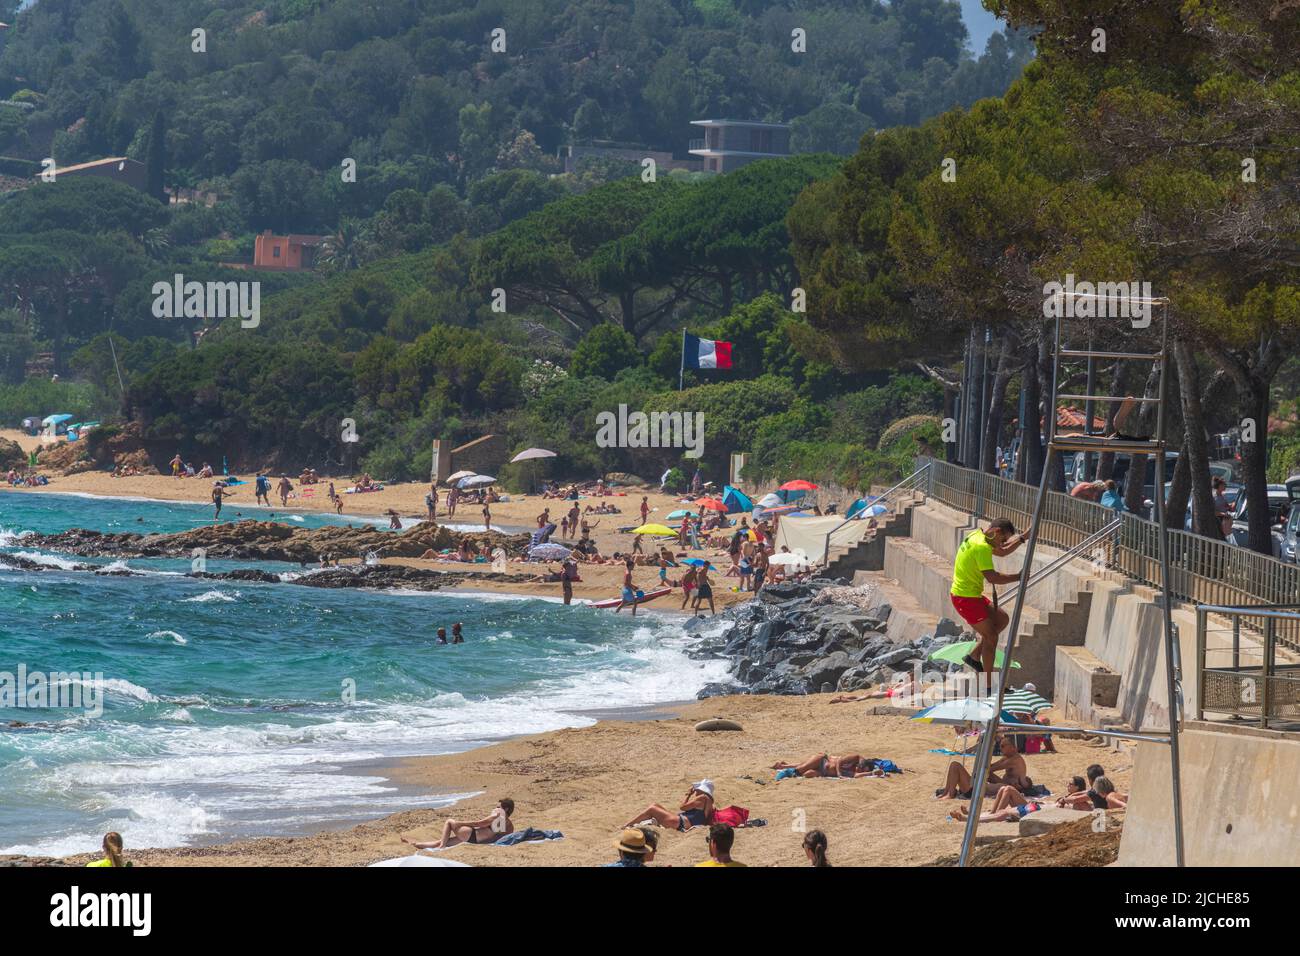 A lifeguard climbs down from a look out post on Gigaro Beach in June, Var, Provence-Alpes-Côte d'Azur, France. Stock Photo